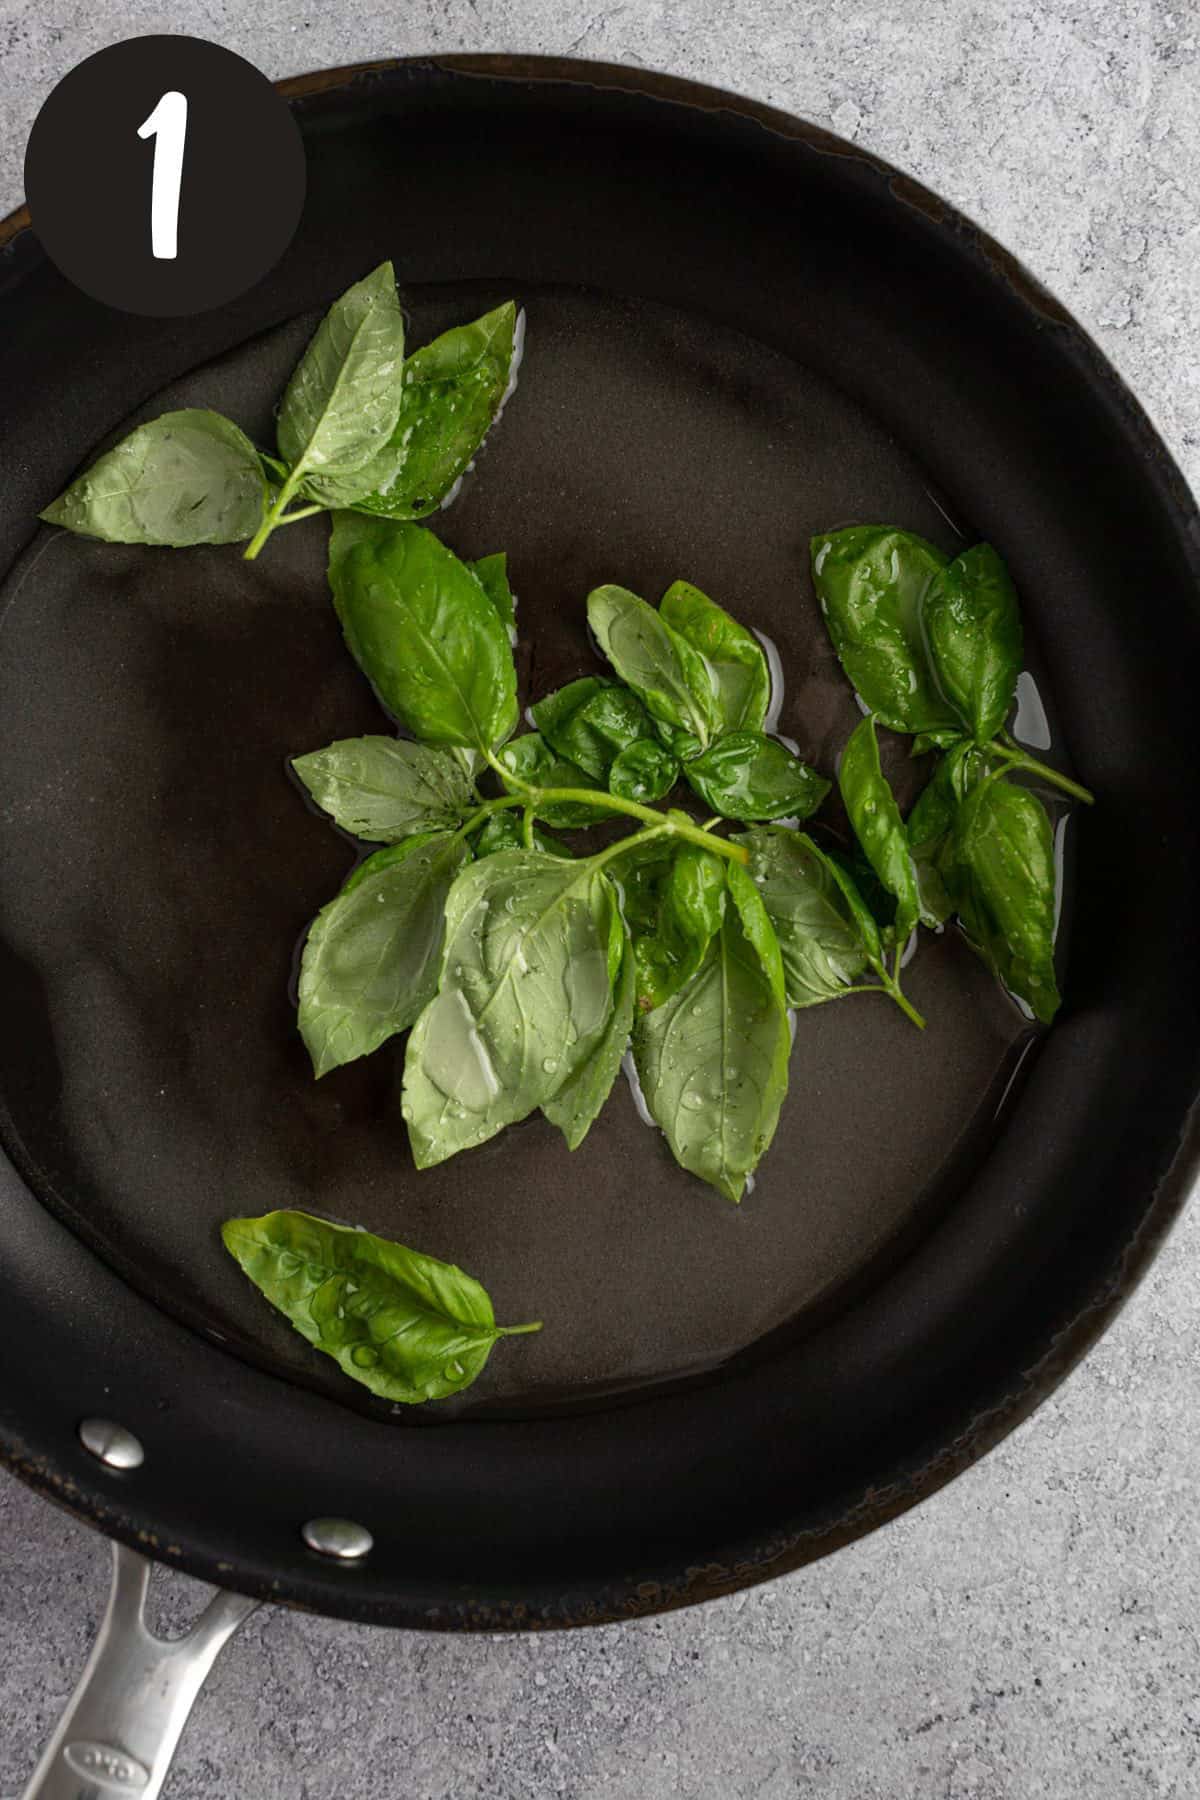 Heating the basil leaves, sugar and water together in a saucepan.